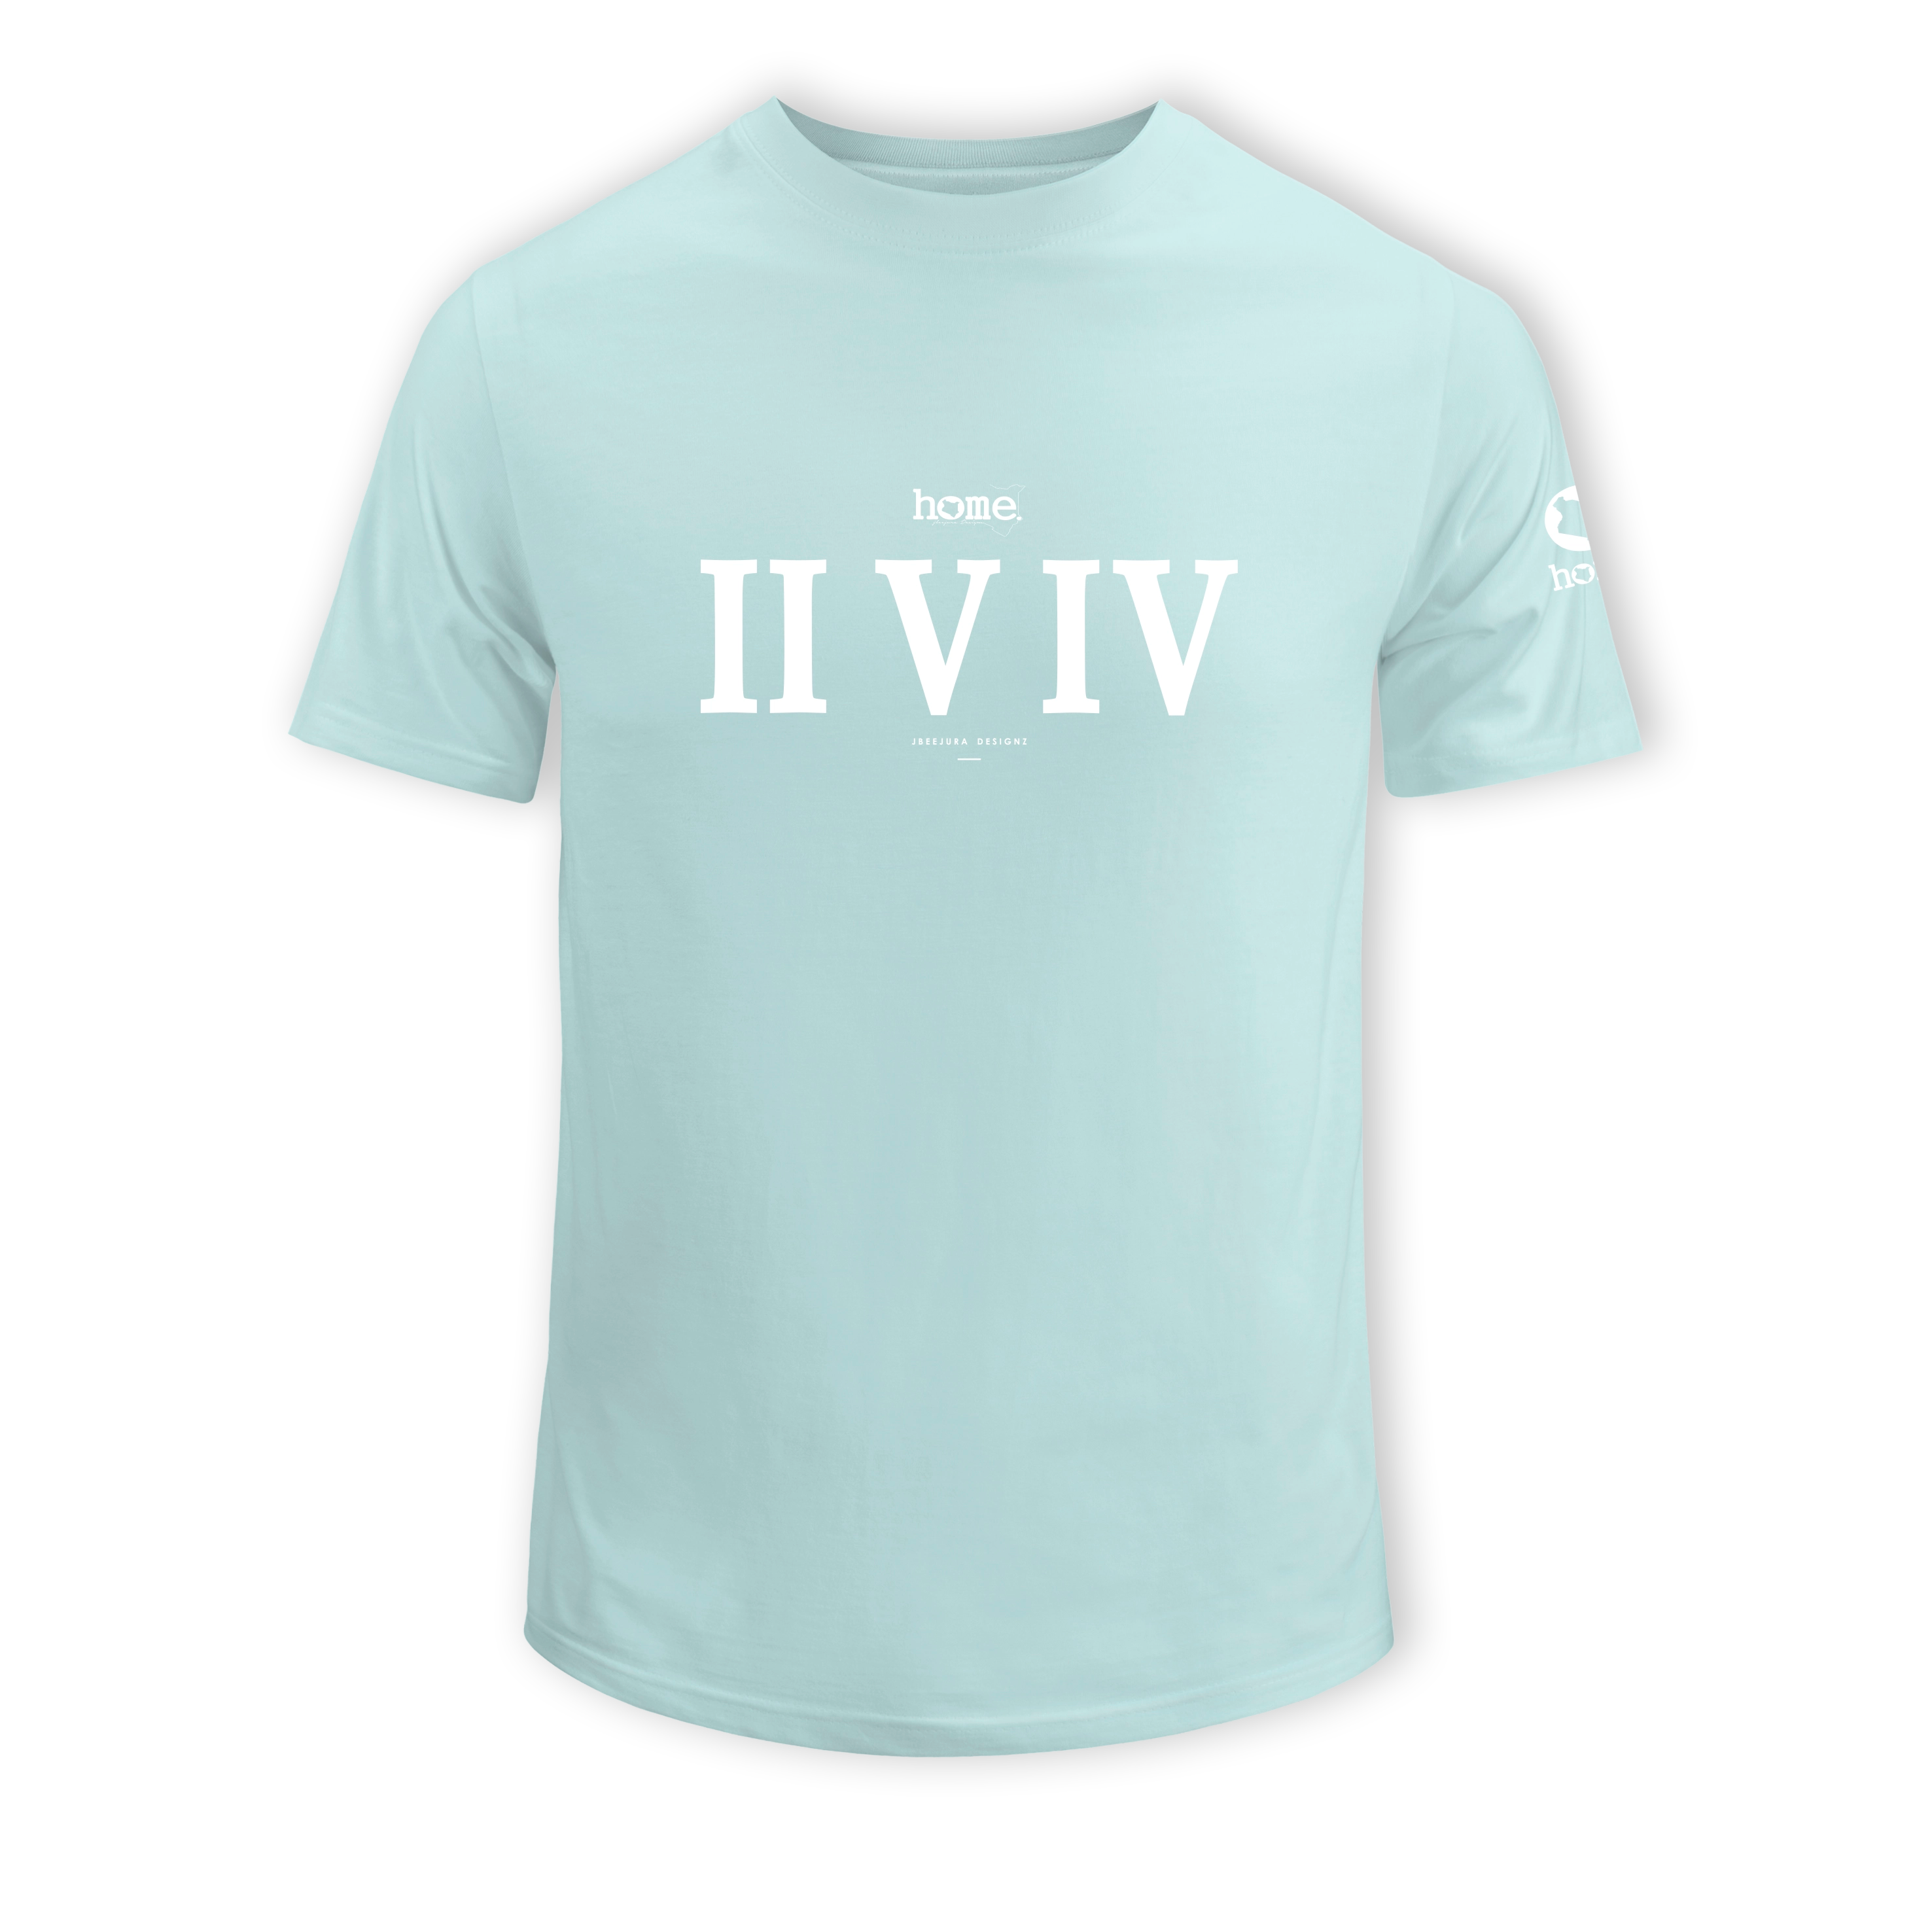 home_254 SHORT-SLEEVED MISTY BLUE T-SHIRT WITH A WHITE ROMAN NUMERALS PRINT – COTTON PLUS FABRIC